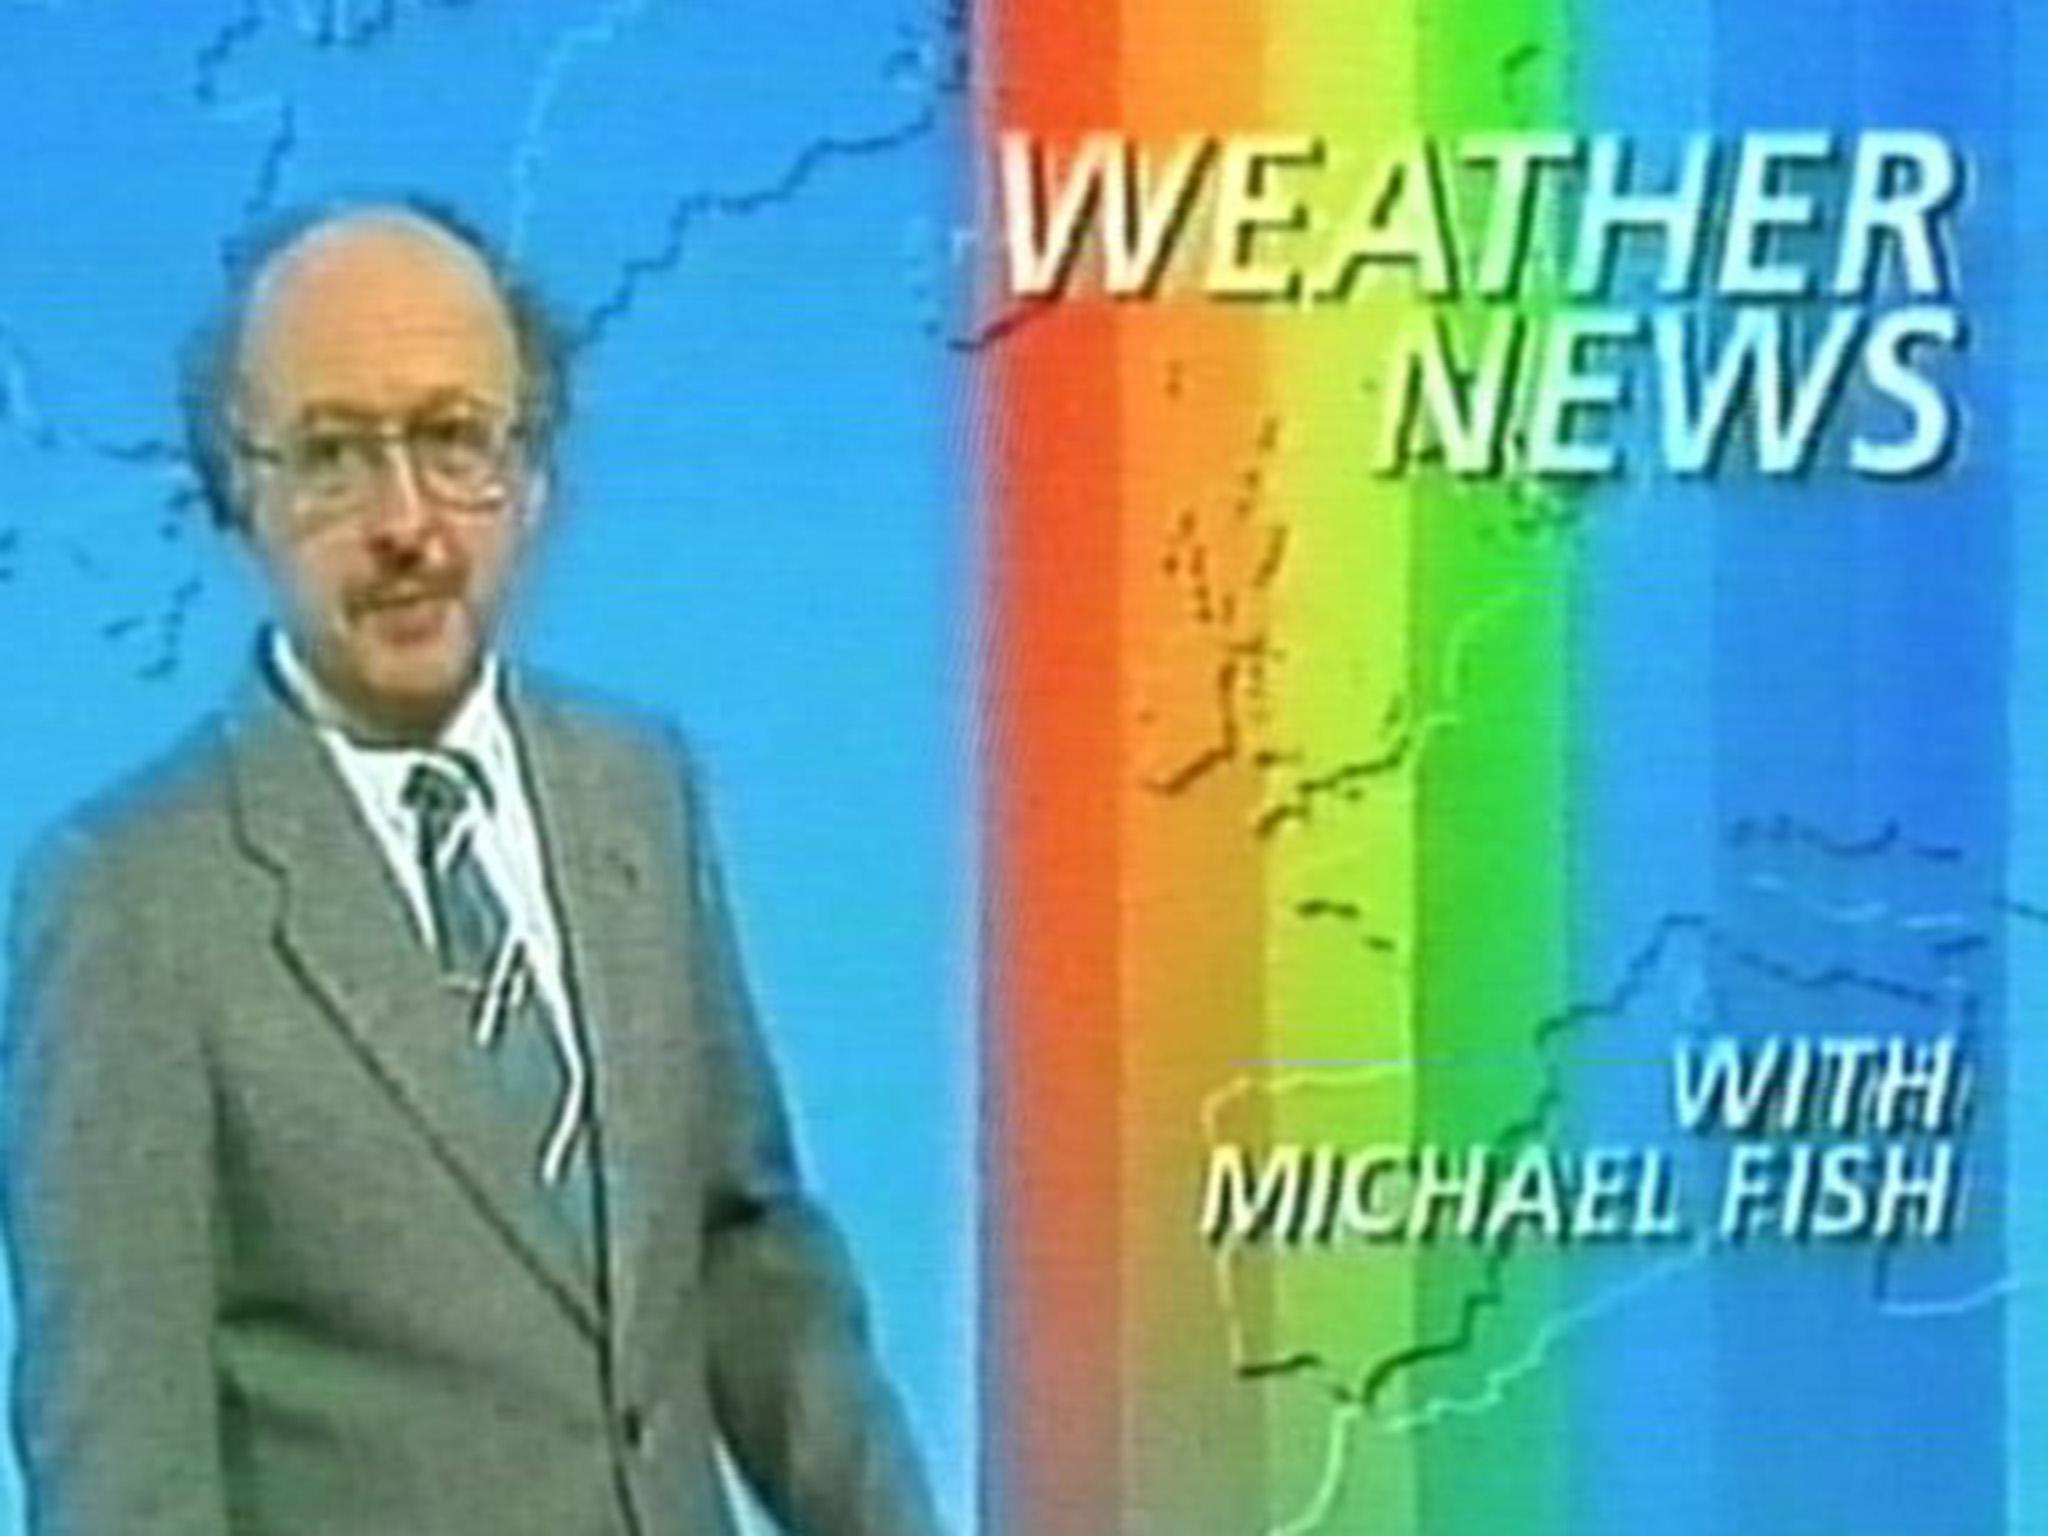 Michael Fish is resigned to the nation remembering only part of his famous forecast